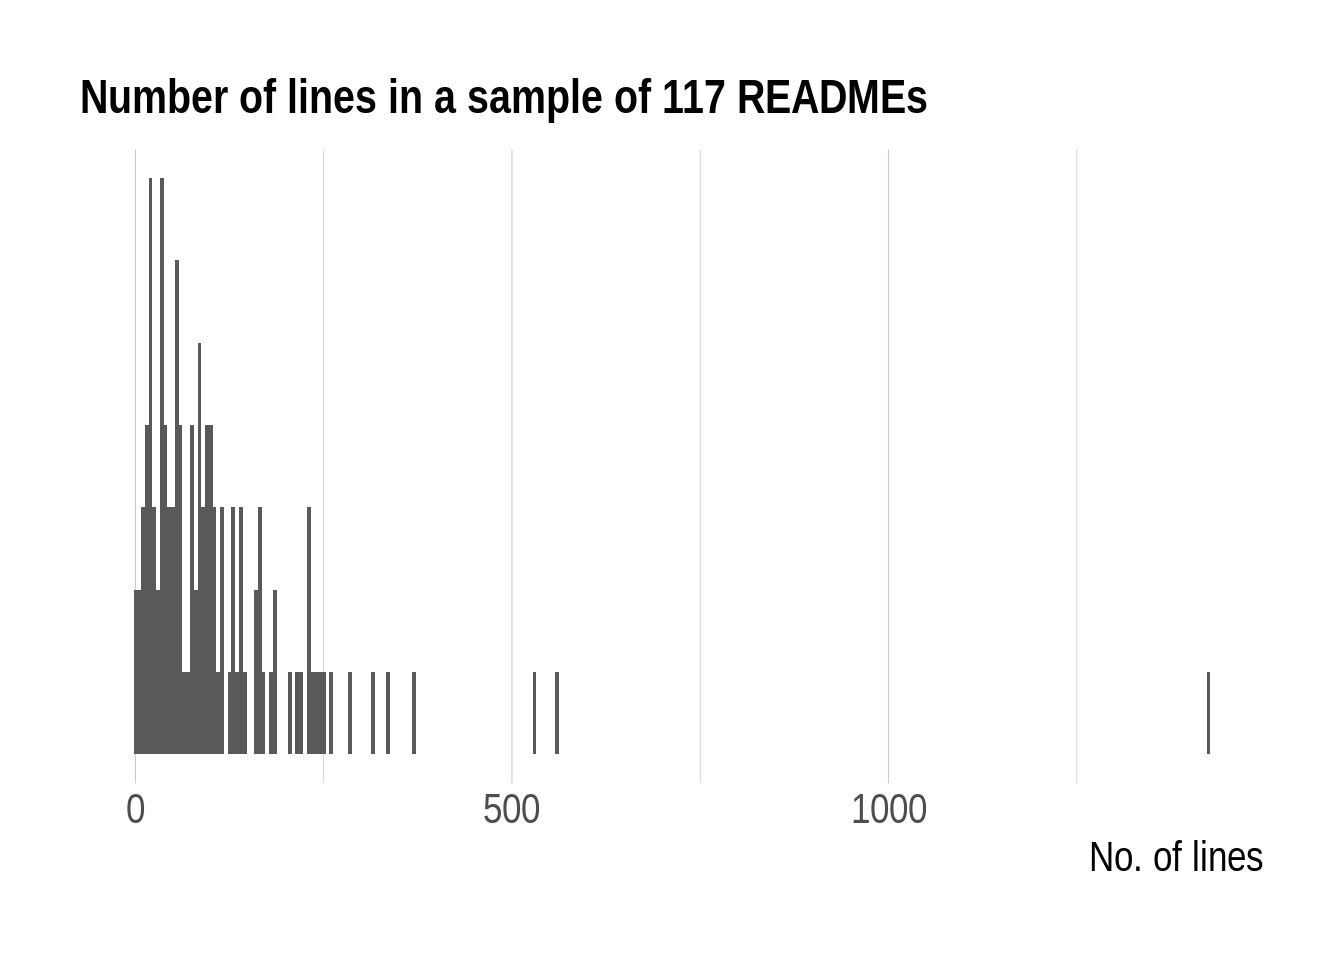 Dot plot of the number of lines in READMEs